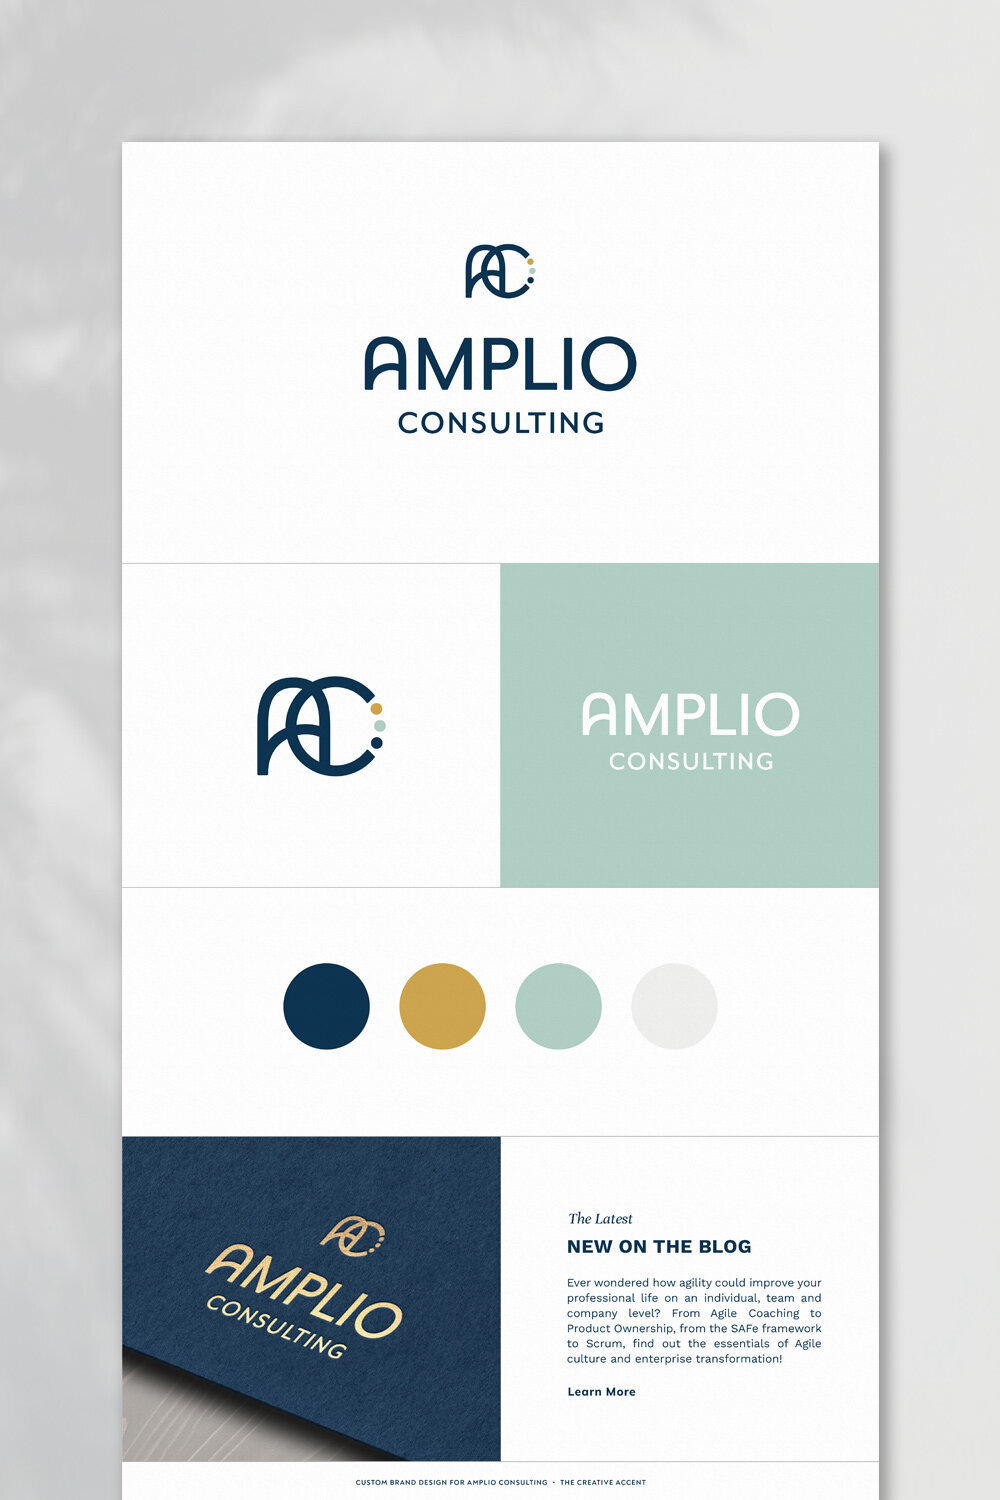 logo and brand design for consulting agency